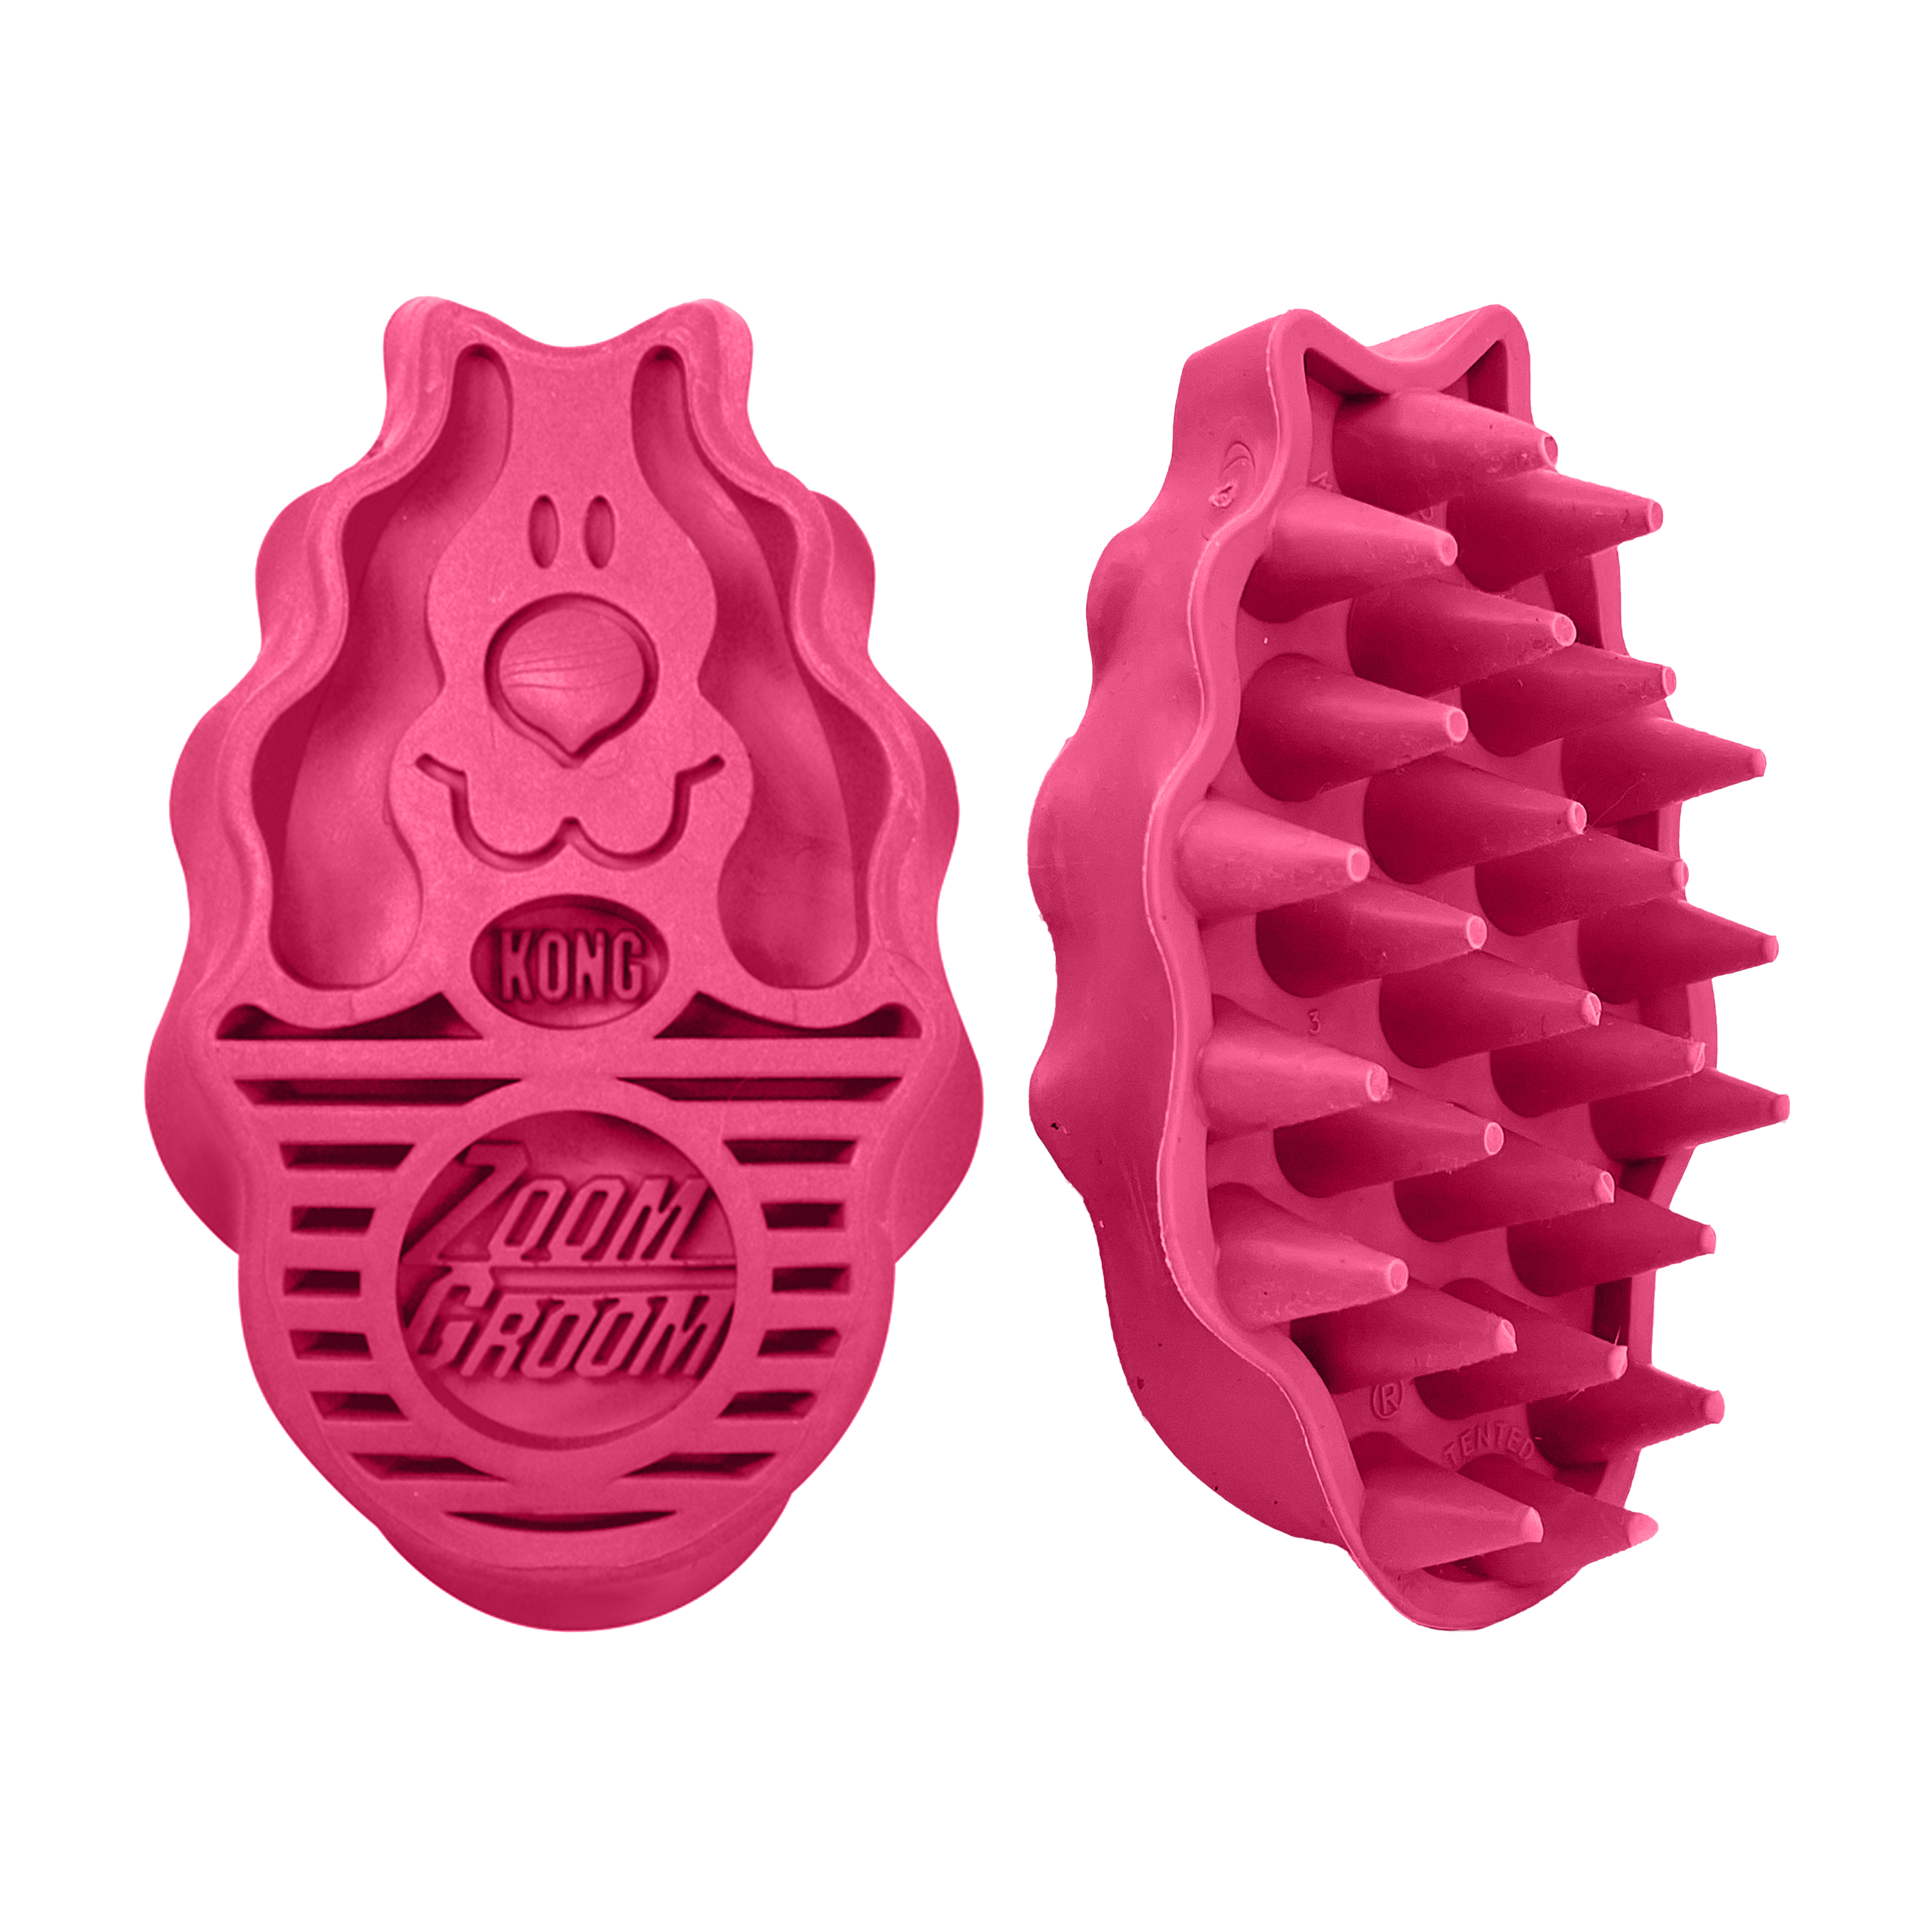 ZoomGroom Raspberry offpack product image